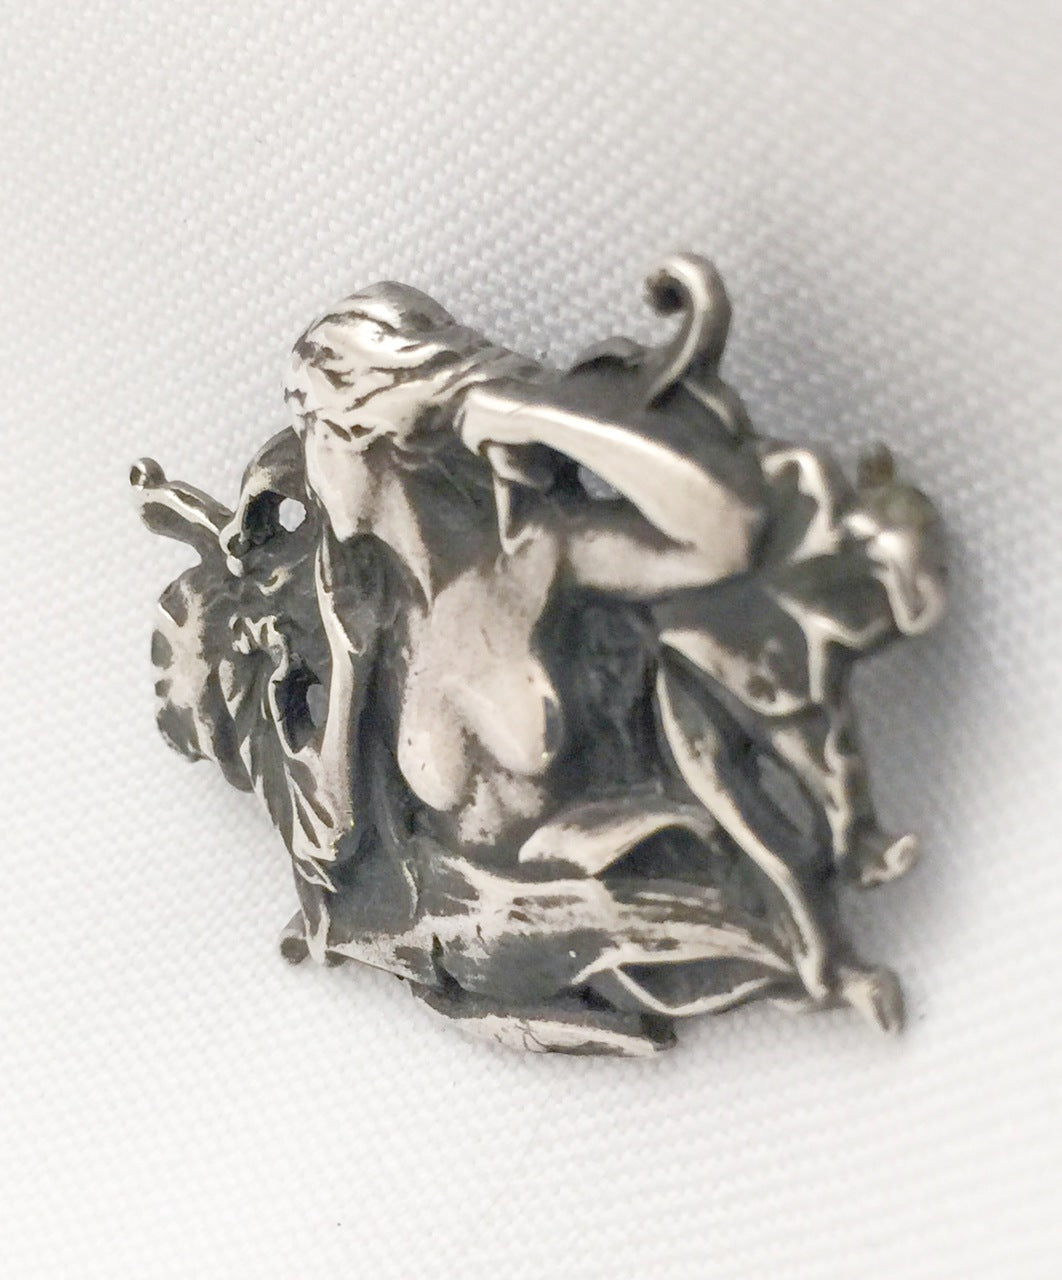 Lady in the Woods Pin w Flowers Sterling Silver Vintage Art Deco